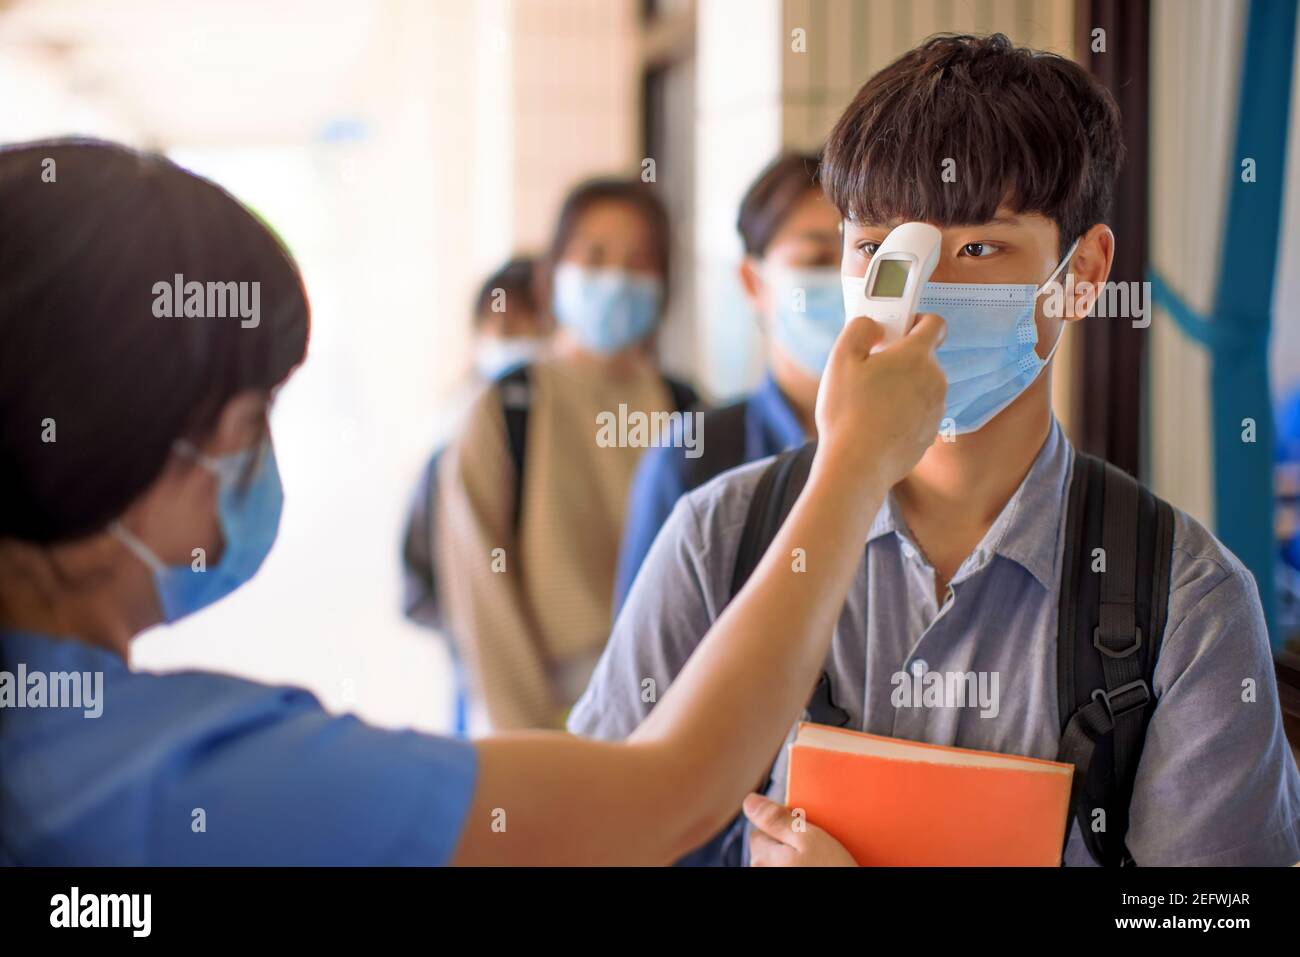 Measure Temperature and medical check at school for covid-19 Stock Photo